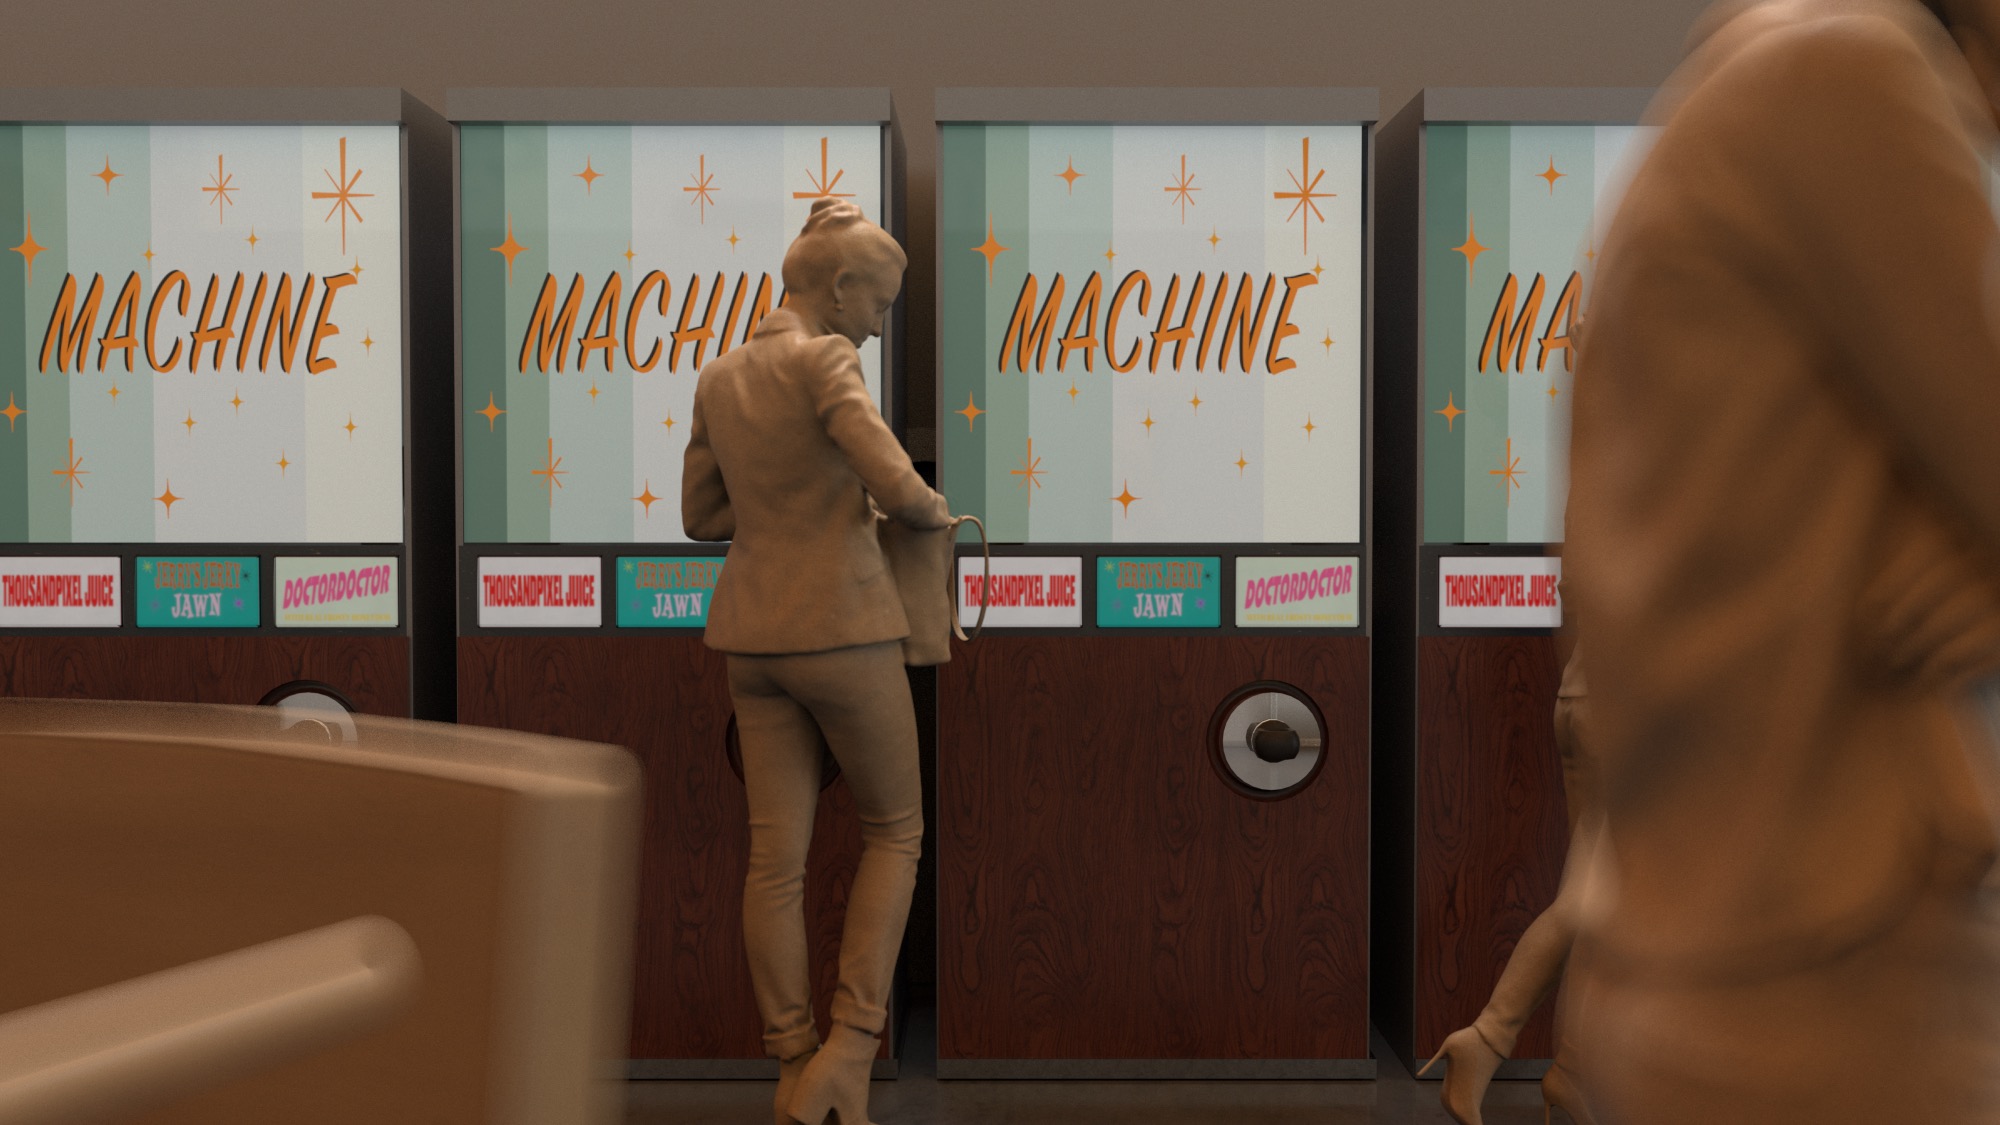 Vending machine from a possible future.